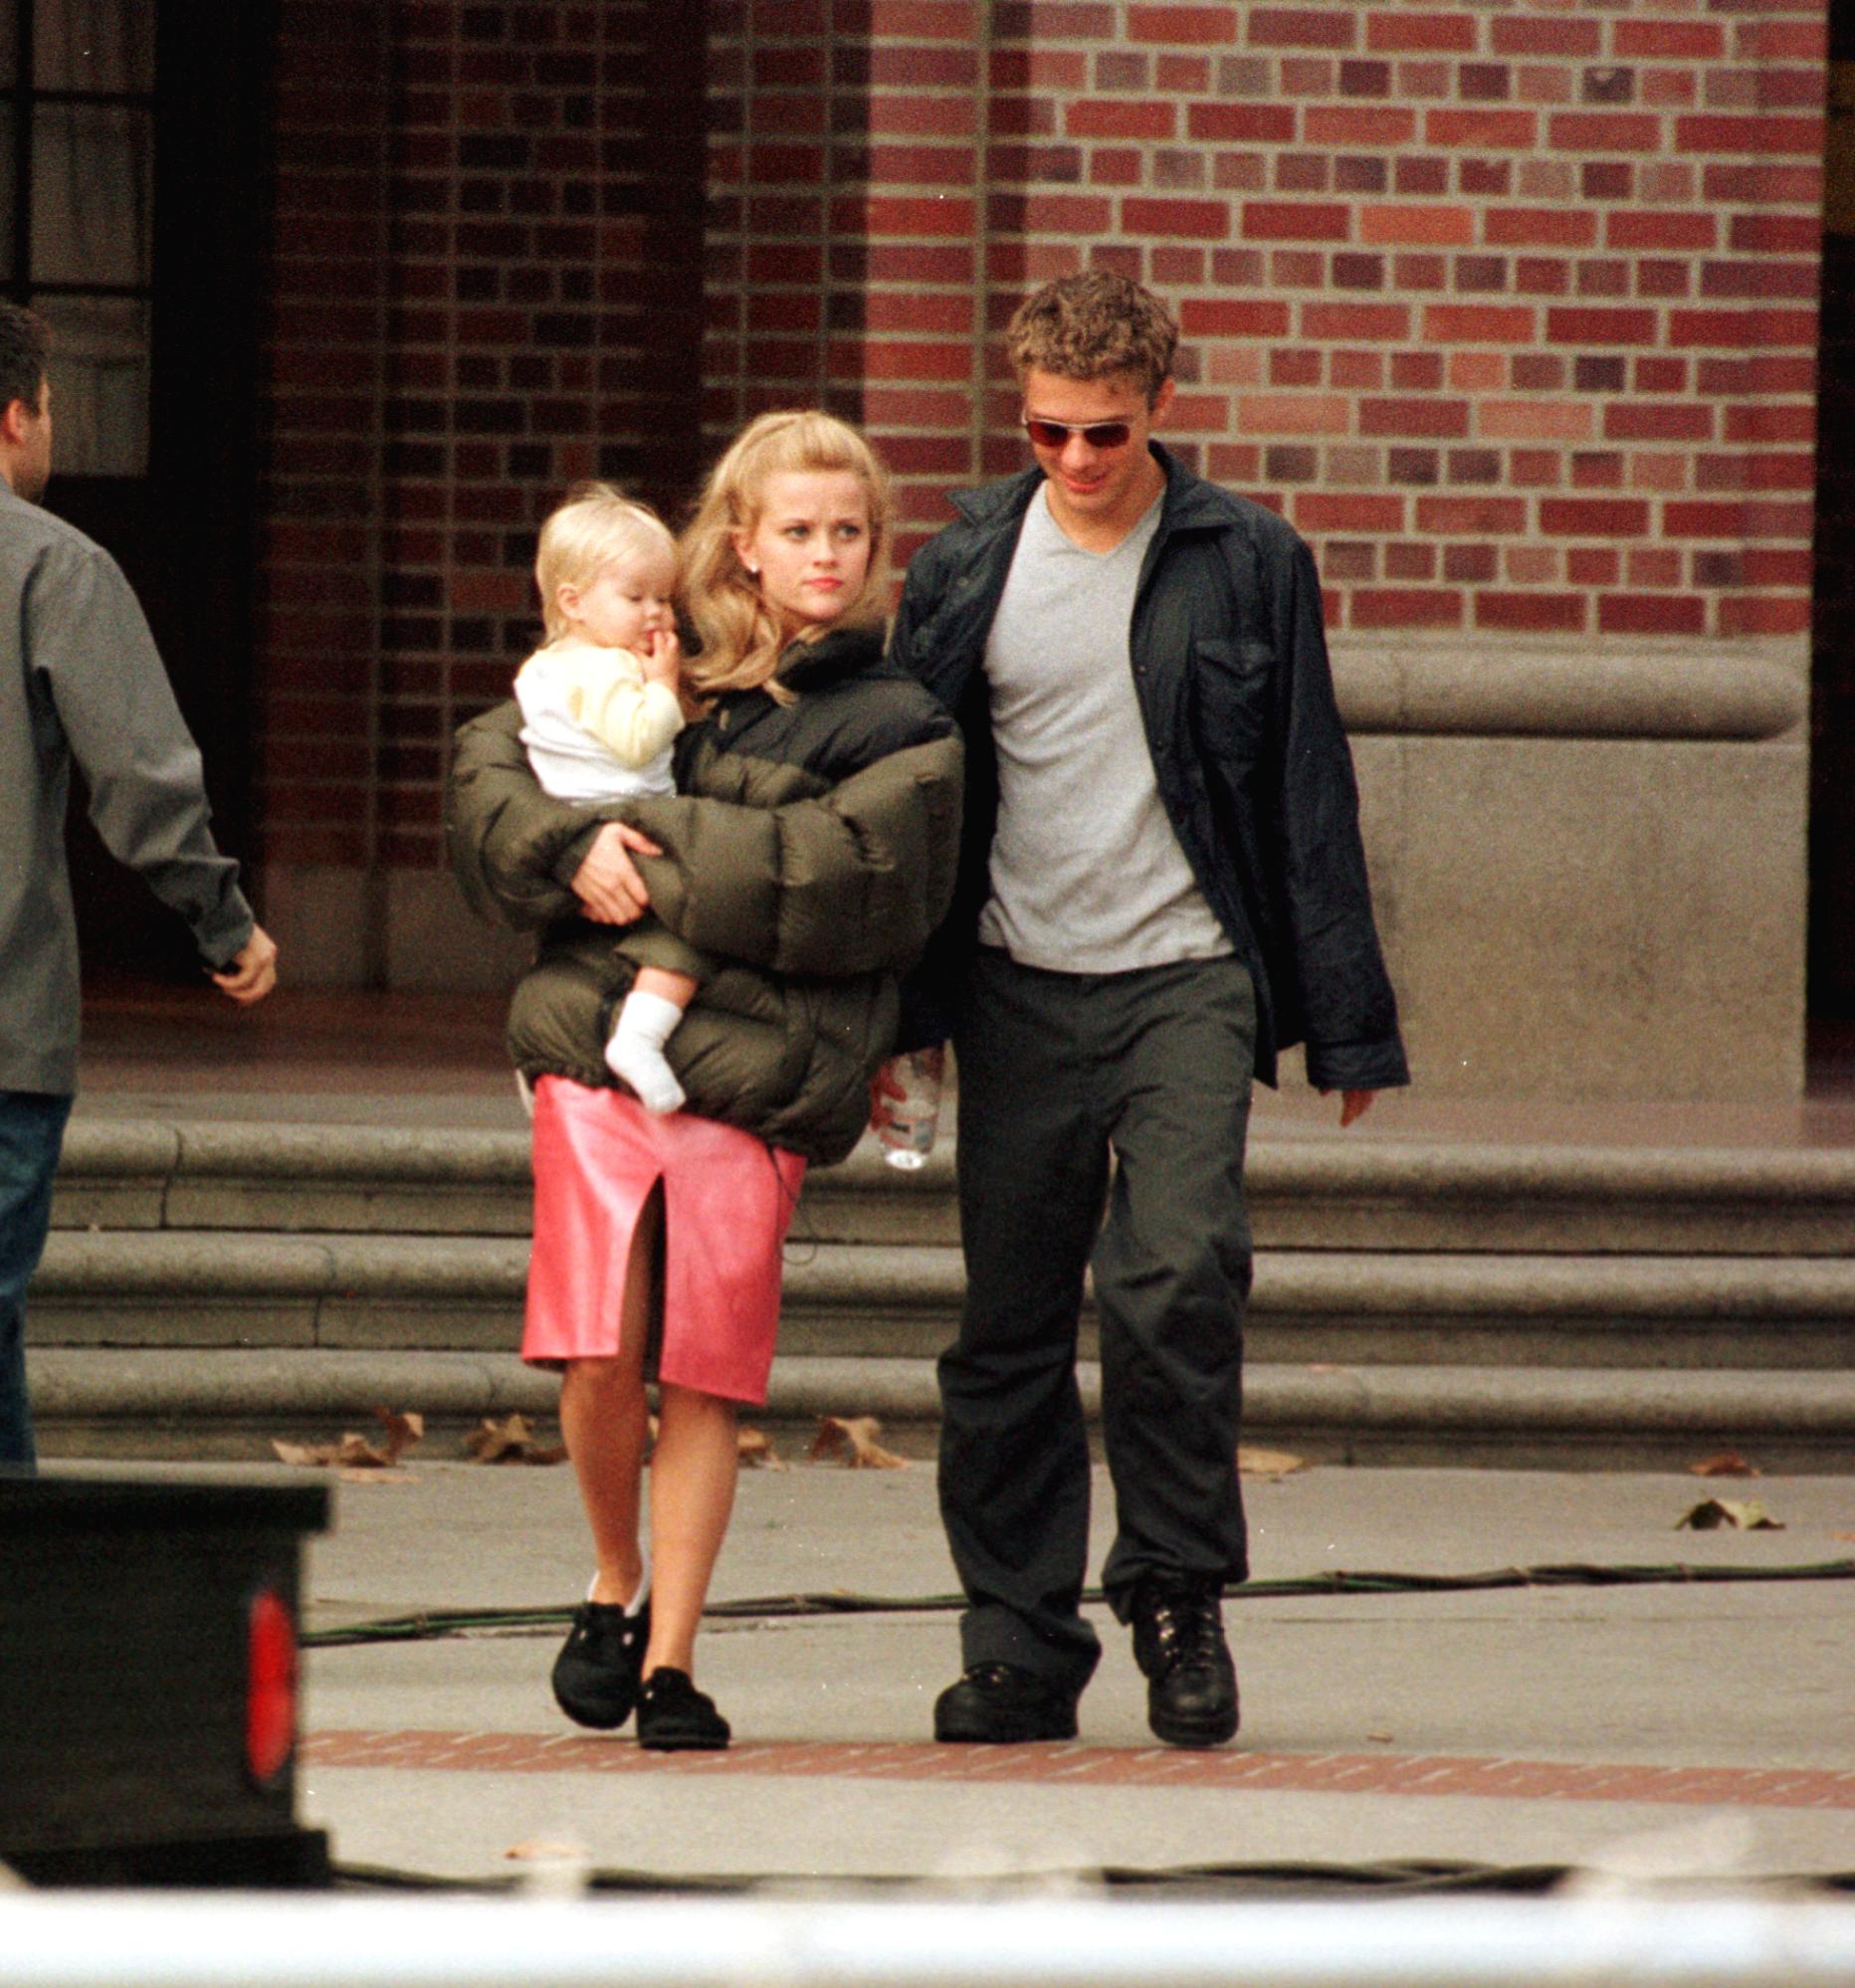 Actress Reese Witherspoon Is visited by her husband Ryan Phillippe and their child on the set of "Legally Blonde" October 21, 2000 in Los Angeles, CA. | Source: Getty Images